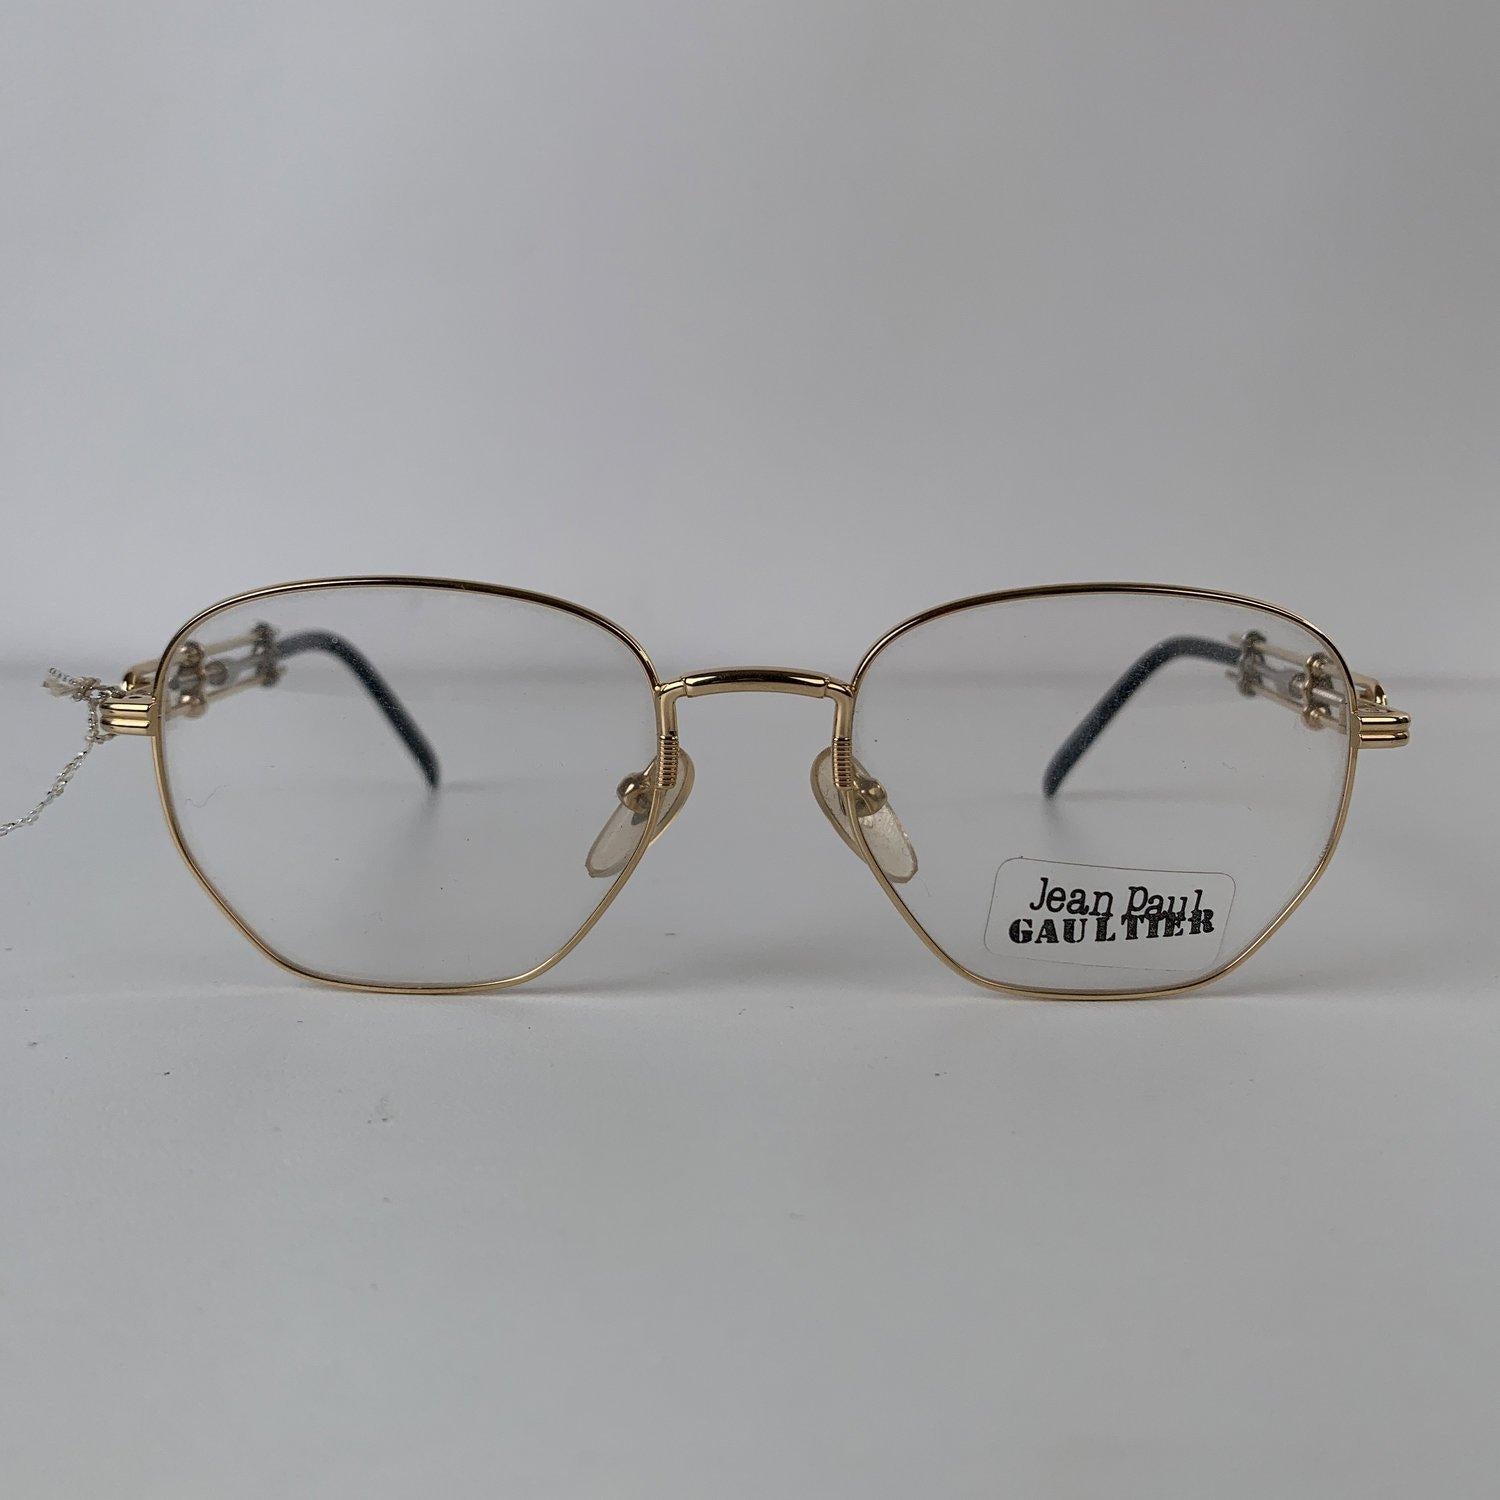 MATERIAL: Metal COLOR: Gold MODEL: 55-4174 GENDER: Adult Unisex SIZE: Medium Condition NOS (NEW OLD STOCK) - Never Worn or Used - They will come with a Generic Case Measurements TEMPLE MAX. LENGTH: 135 mm EYE / LENS MAX. WIDTH: 50 mm EYE / LENS MAX.